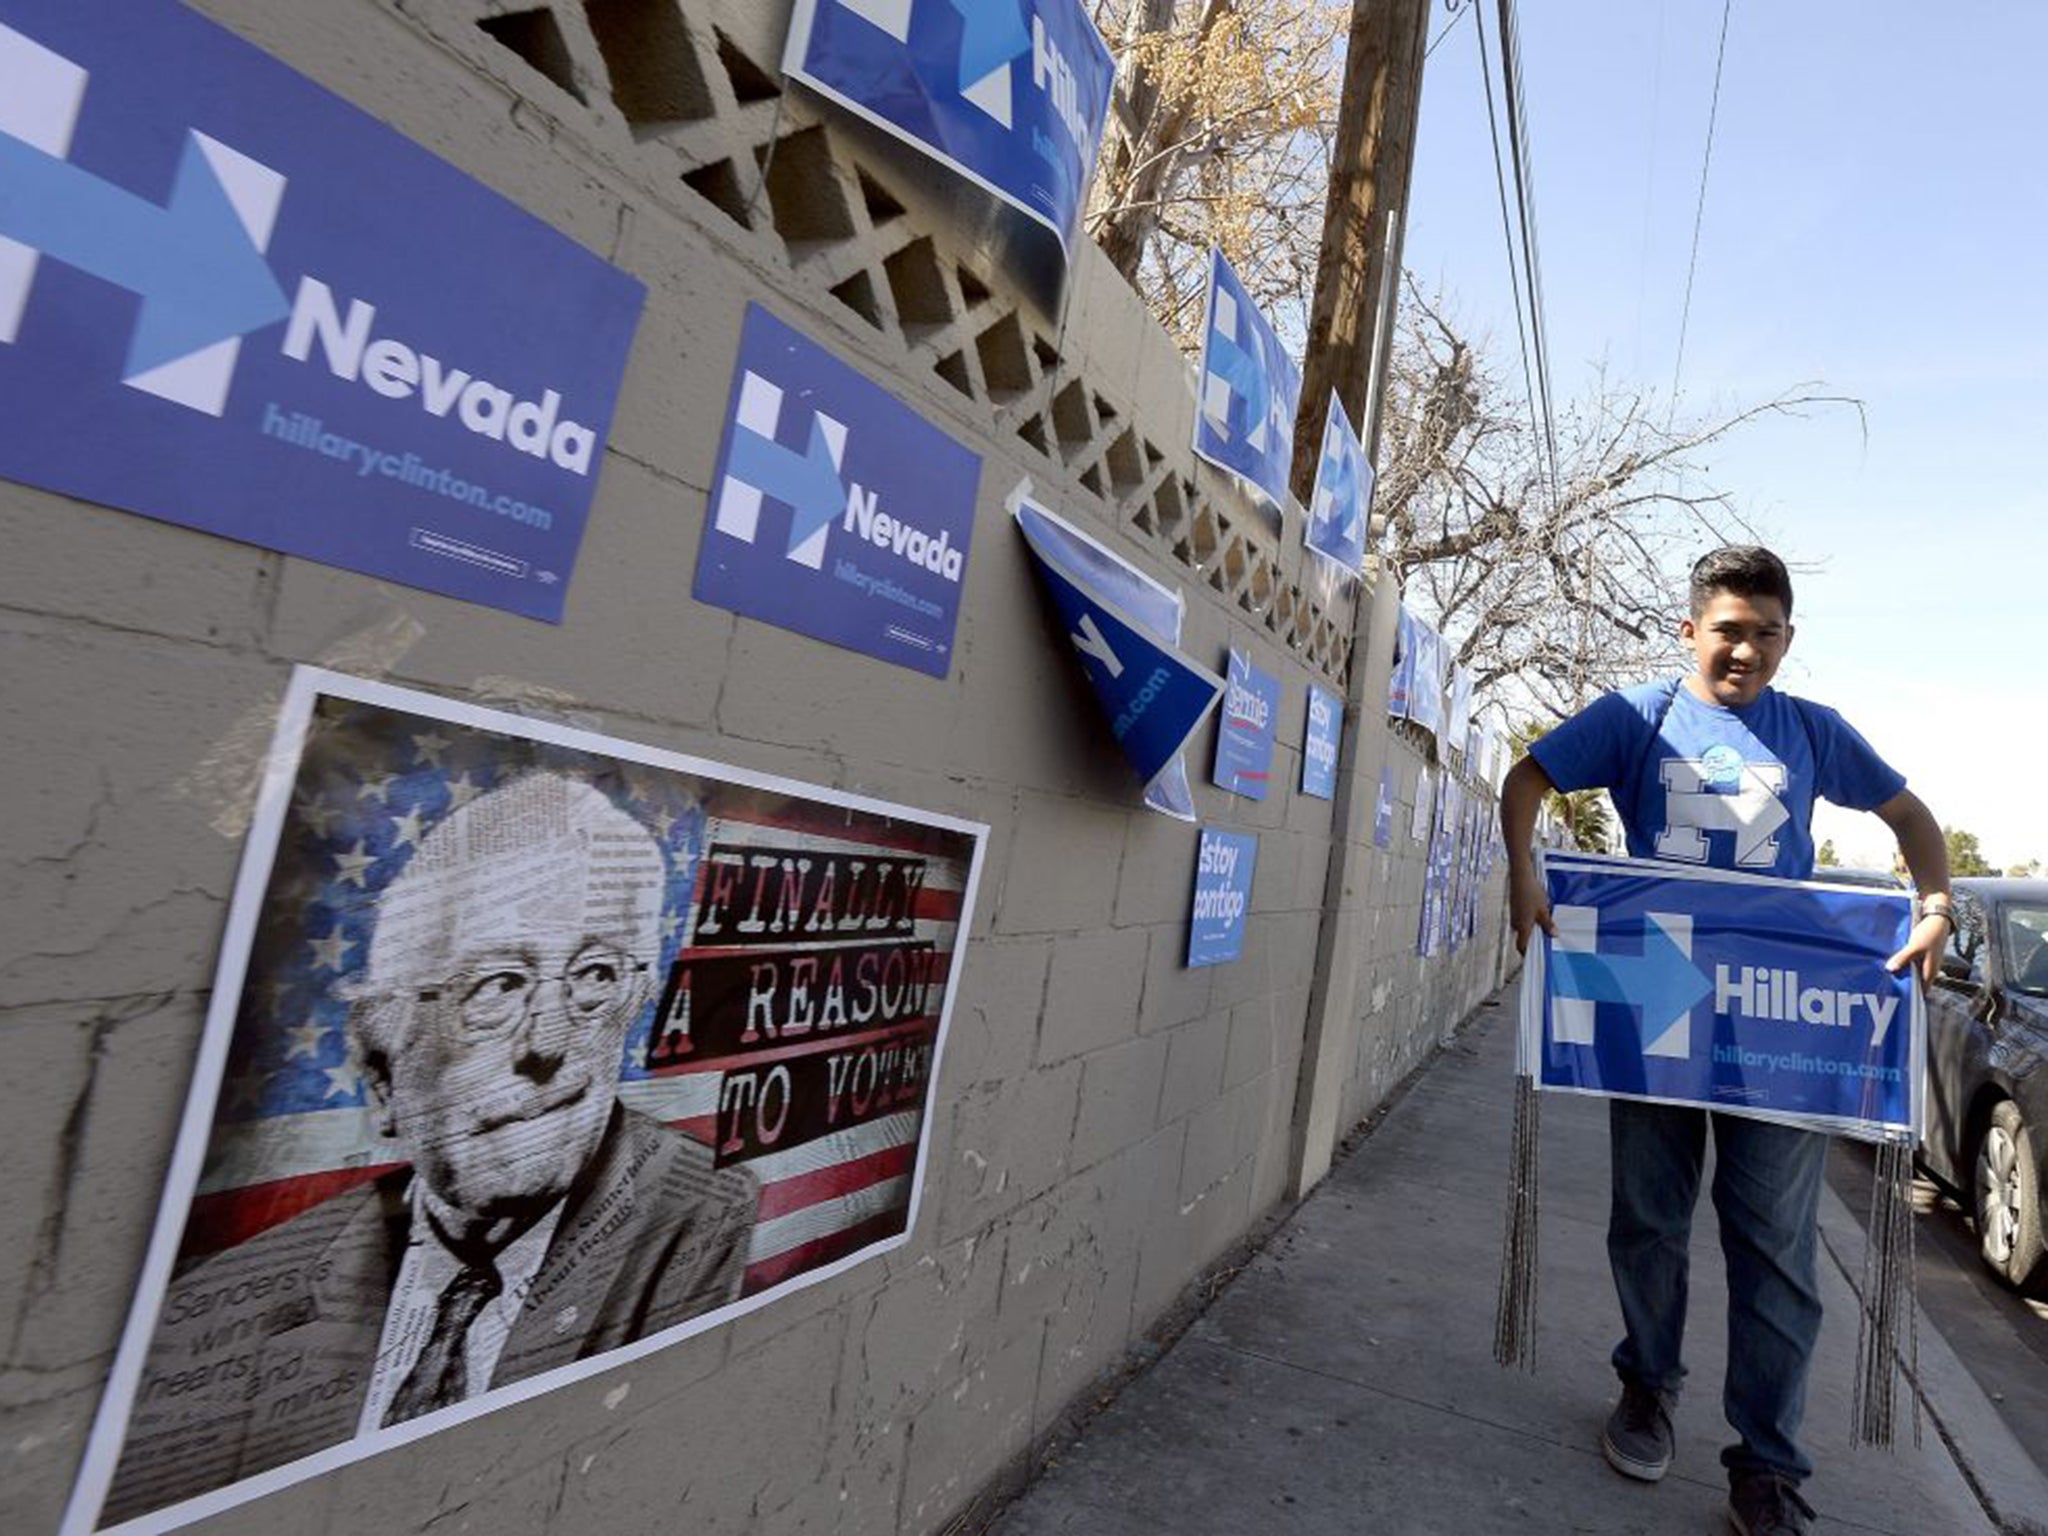 The vote in Nevada between Hillary Clinton and Bernie Sanders was expected to be extremely tight